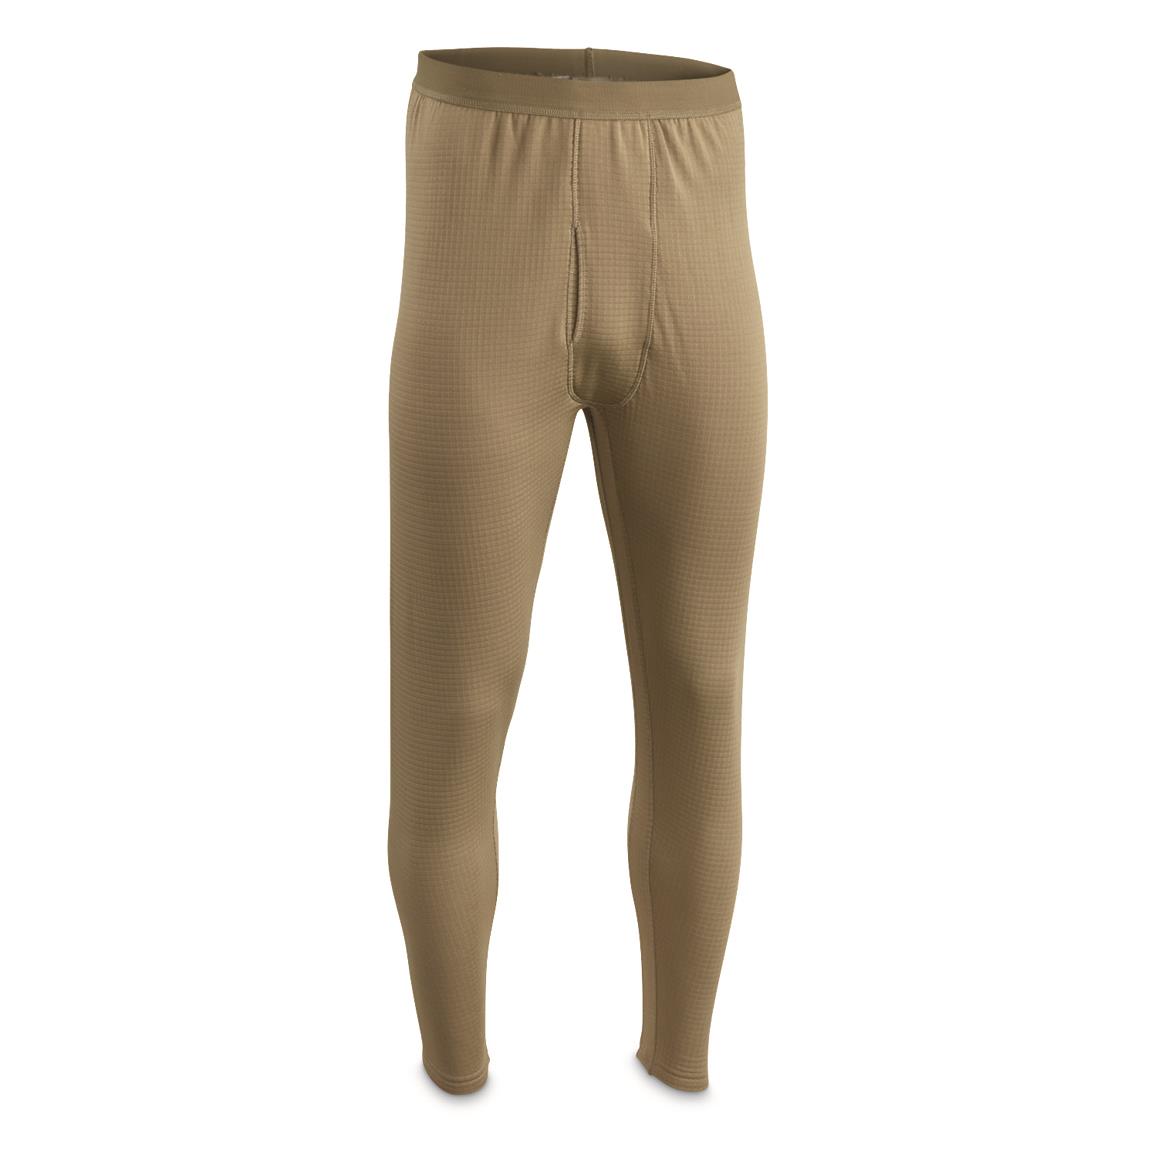 Brooklyn Armed Forces Fleece Base Layer Pants, Coyote